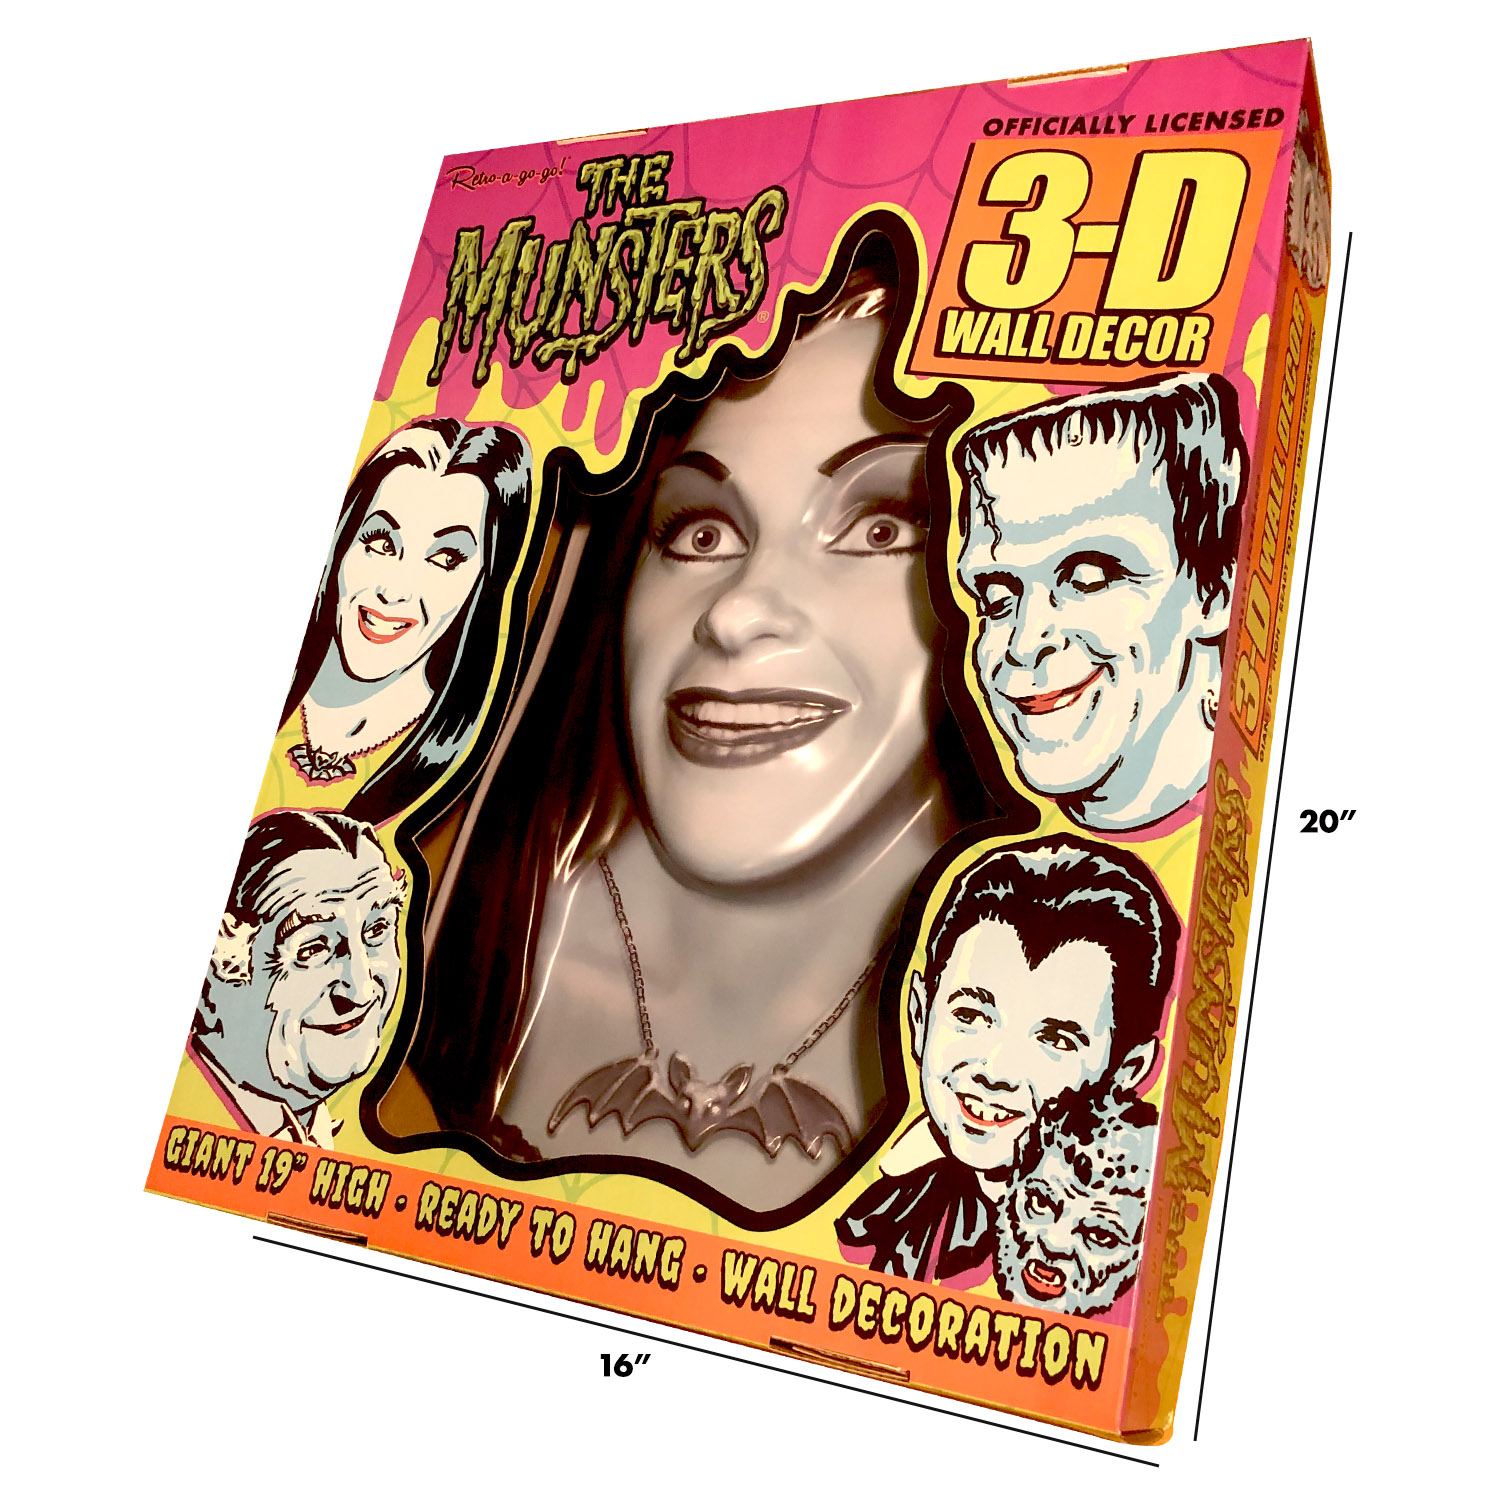 Officially lic.Lily Munster 3D giant mask by Retro-a-go-go!